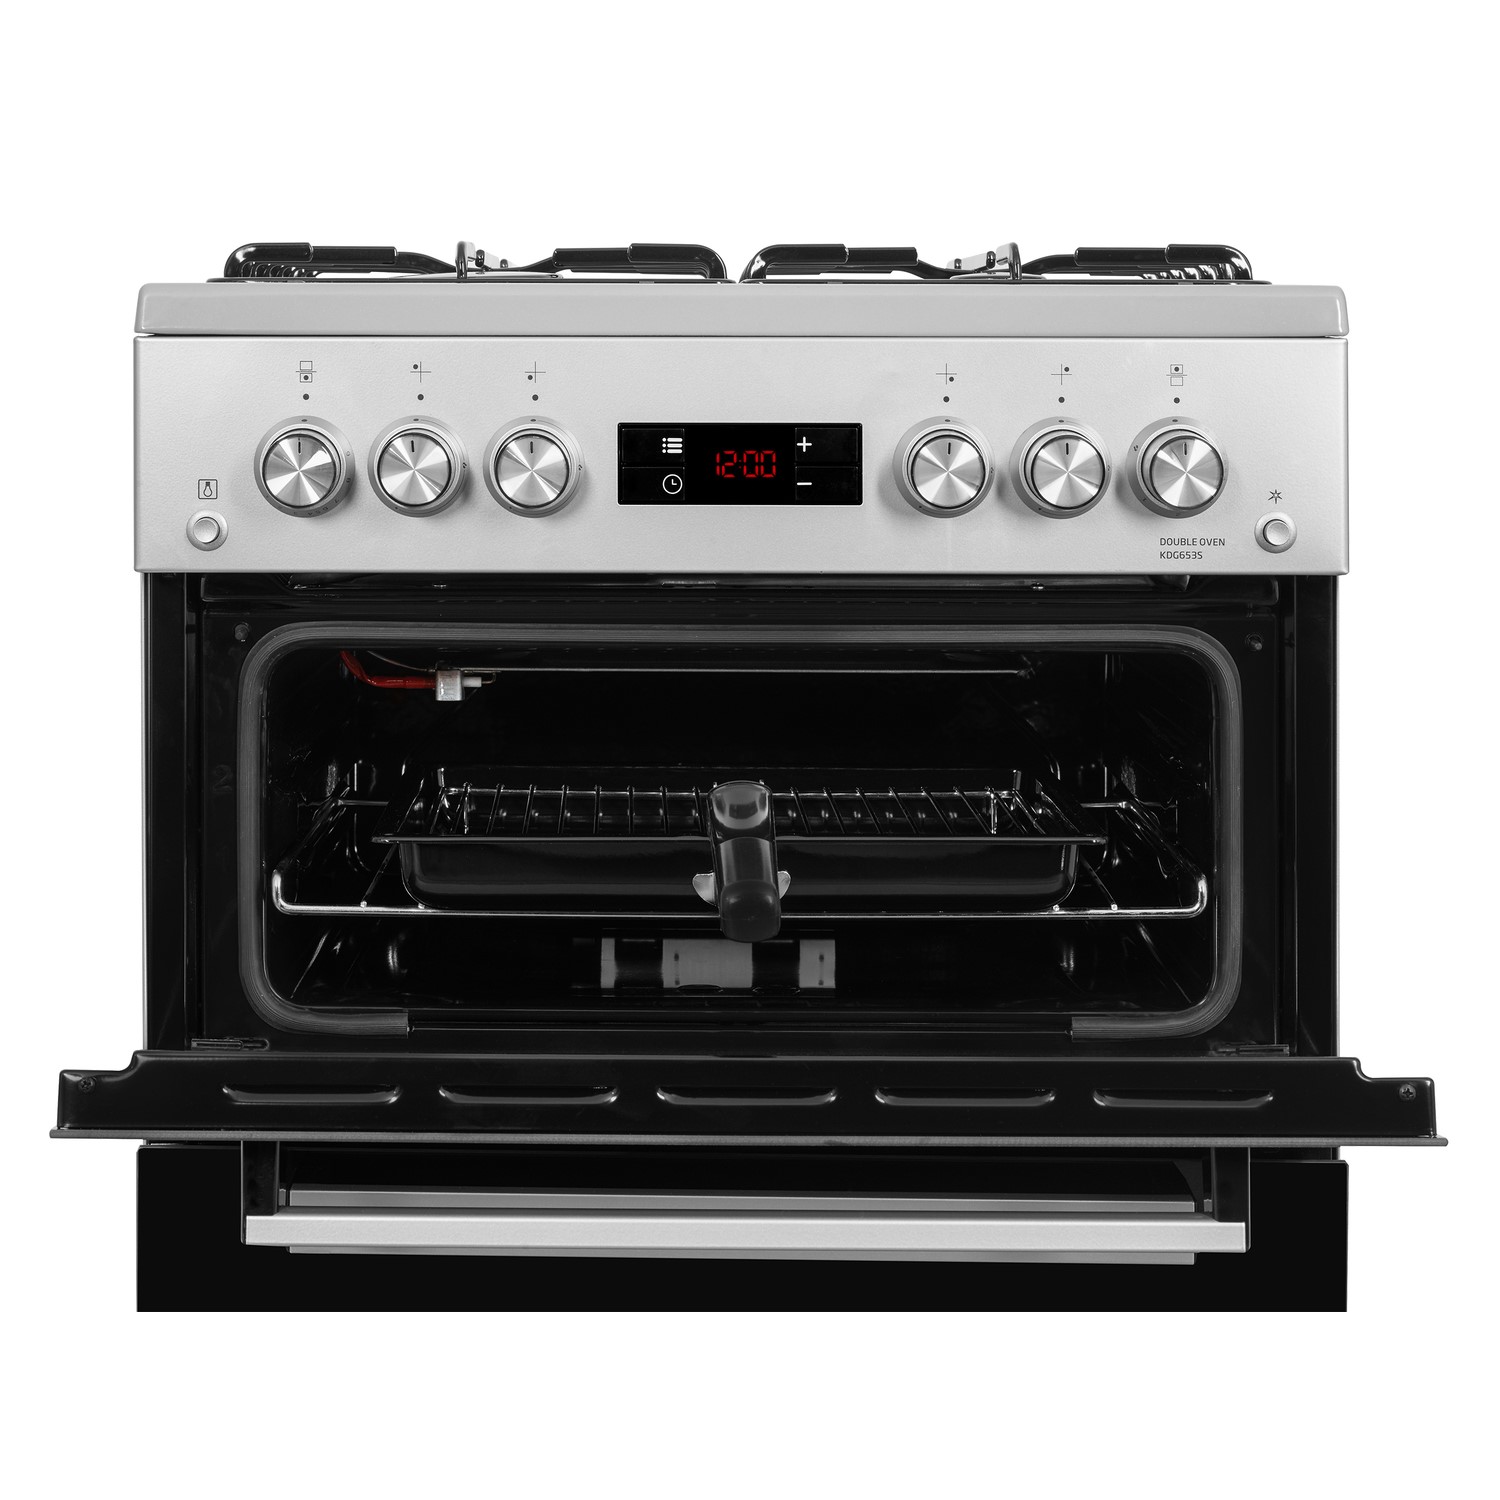 Beko KDG653S 60cm Double Oven Gas Cooker in Silver with LED Timer /& Clock